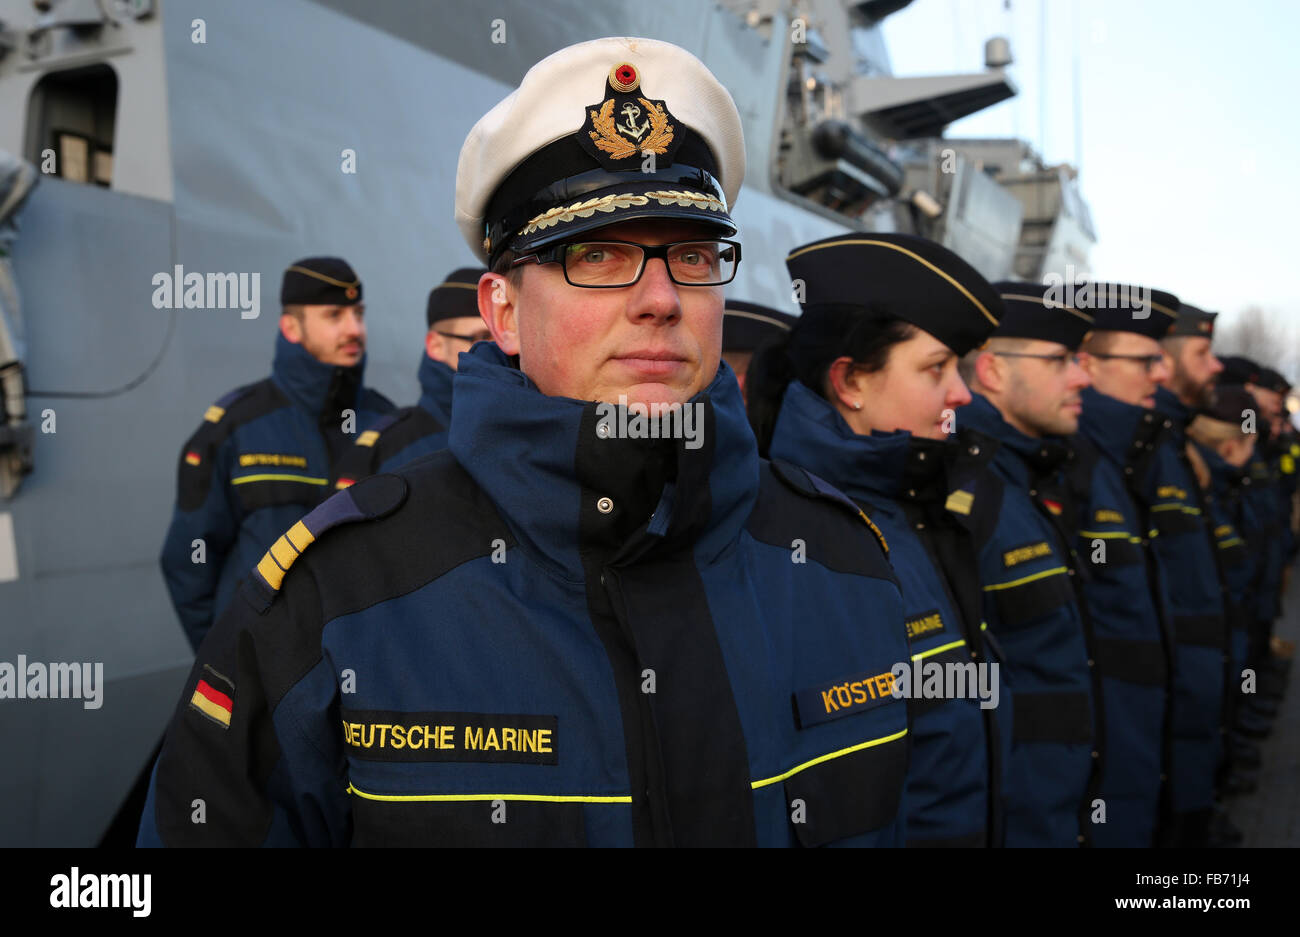 39-year-old Corvette Captain Marco Koester, commanding officer of the German corvette 'Ludwigshafen am Rhein', pictured prior to its departure for the European Union operation 'Eunavfor Med' off the Libyan coast, at the German naval base in Warnemuende, Germany, 11 Janaury 2016. The corvette is the first one of its kind to participate in the operation which focuses on the fight against human traffickers and the rescue of refugees in distress at sea. Photo: BERND WUESTNECK/dpa Stock Photo